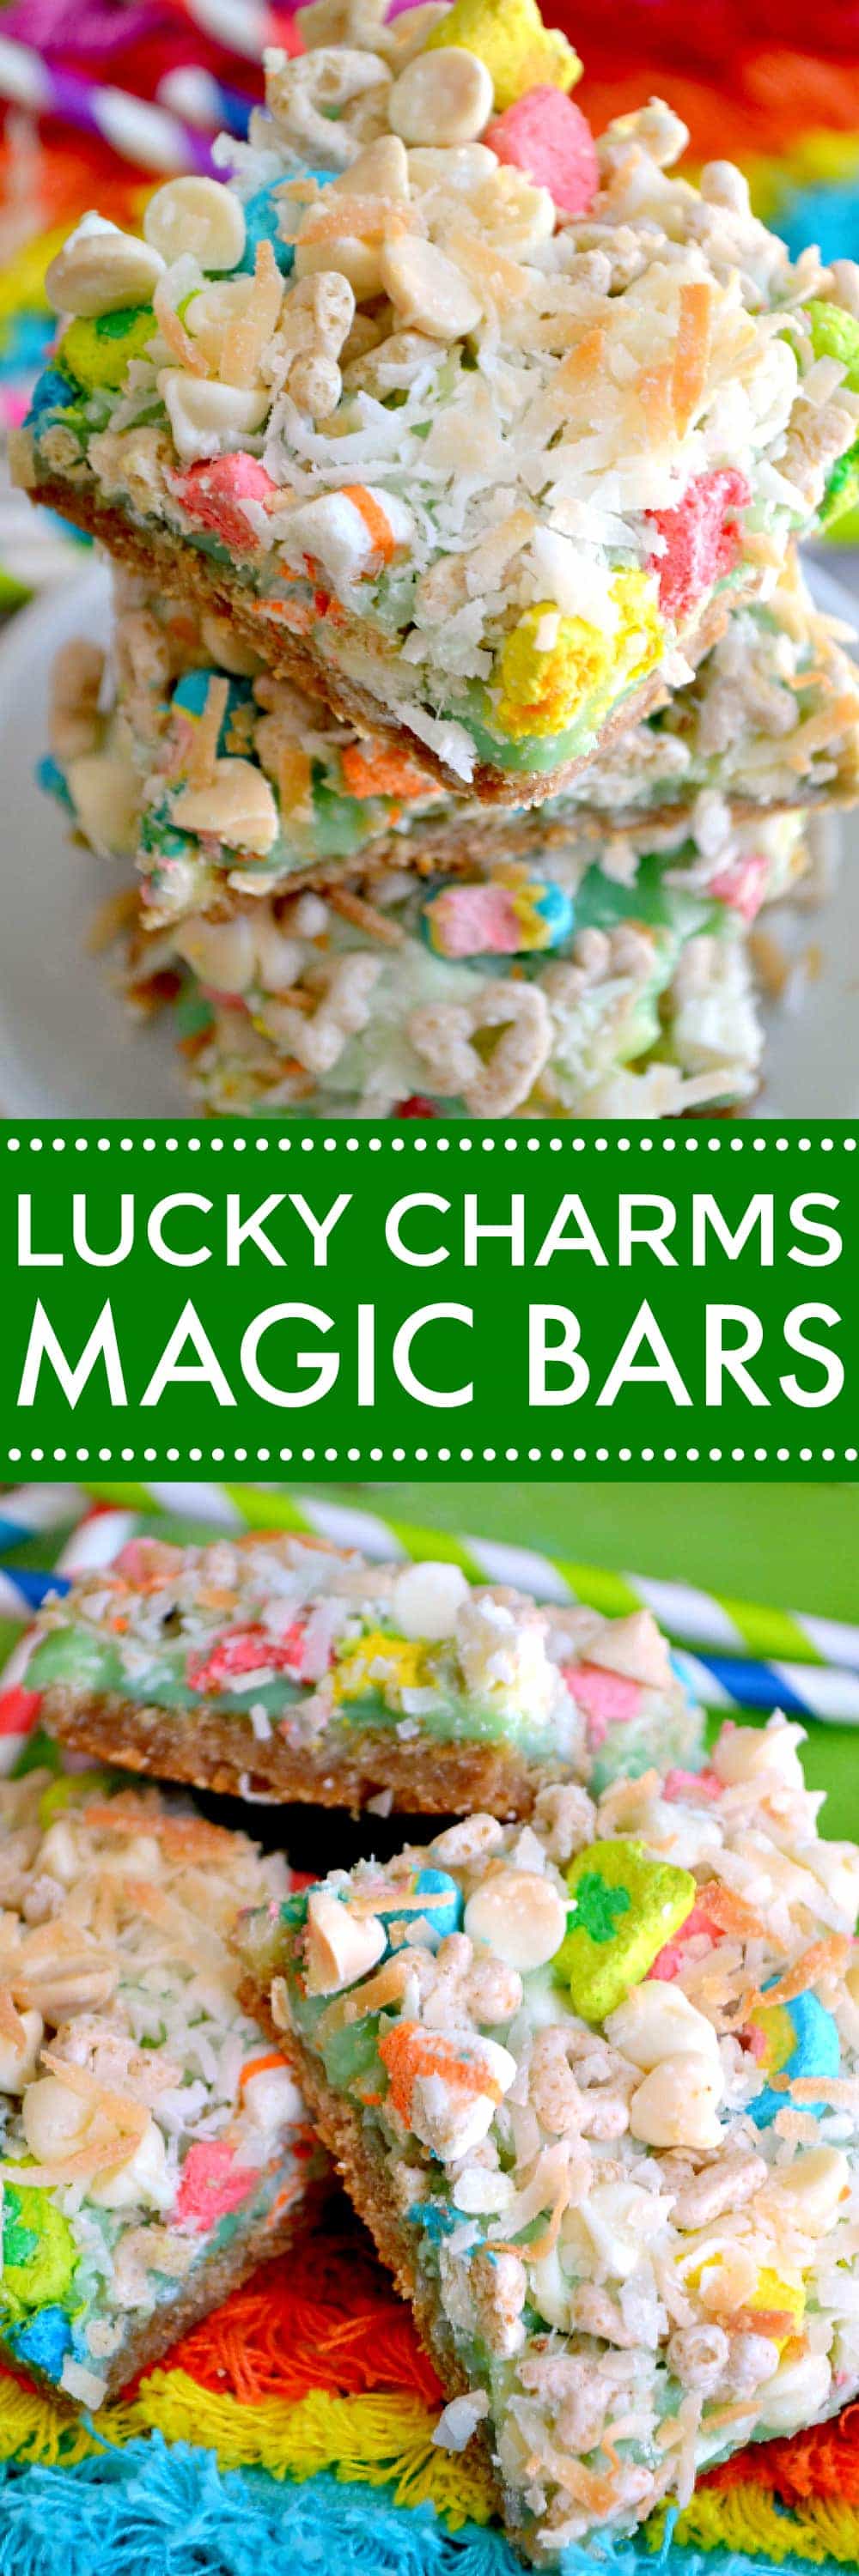 Ooey gooey Lucky Charms Magic Bars with a Nilla Wafer crust, white chocolate chips, mini marshmallows, and coconut. The perfect way to catch a leprechaun.